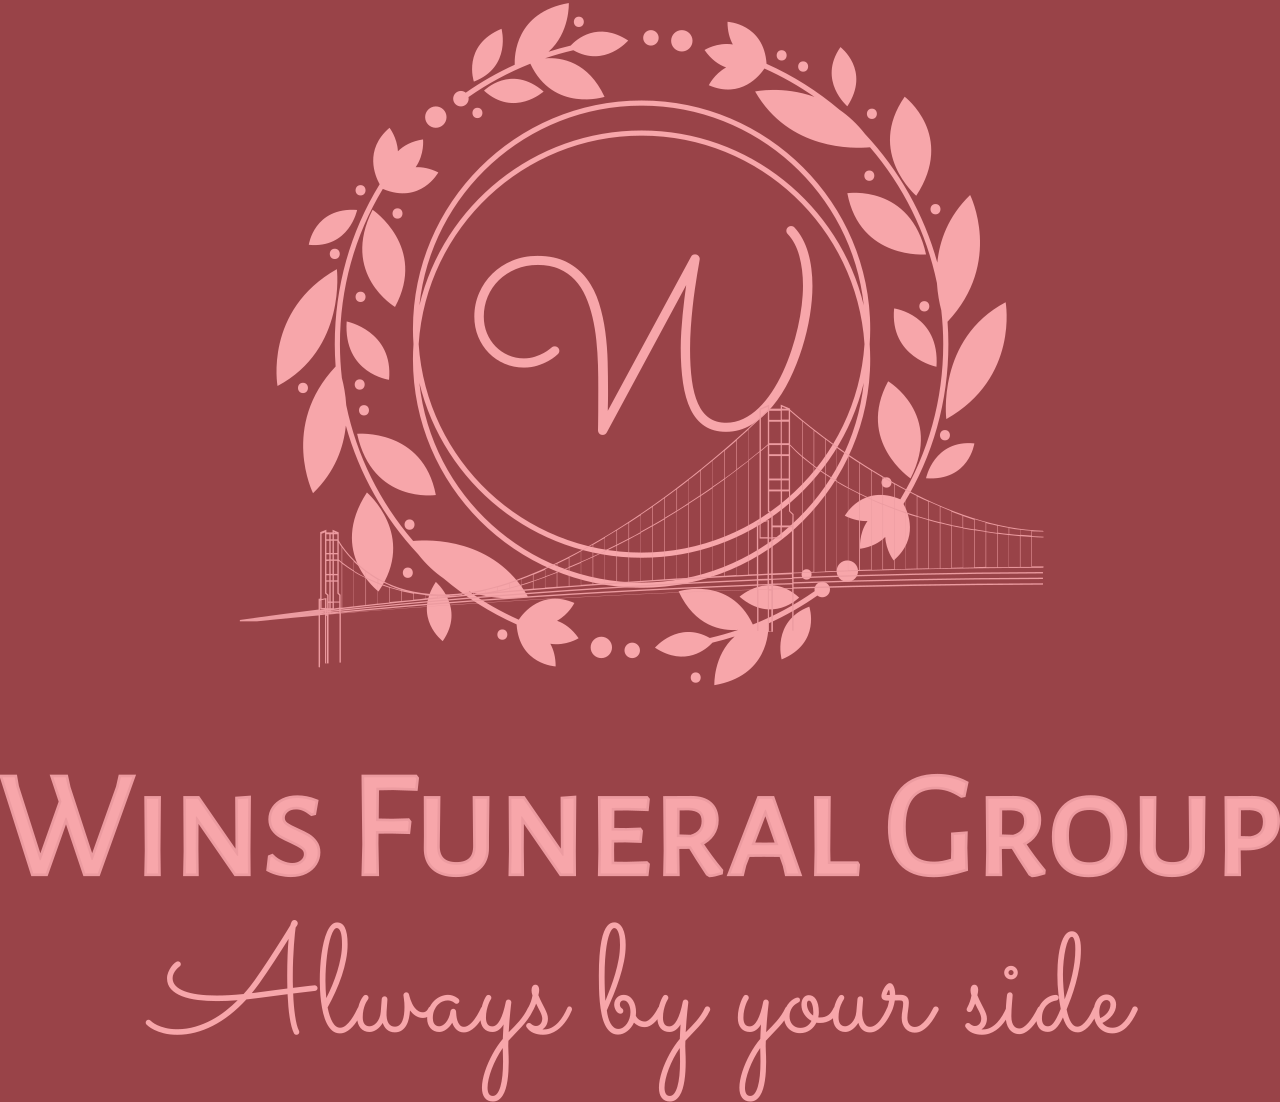 Wins Funeral Group's logo